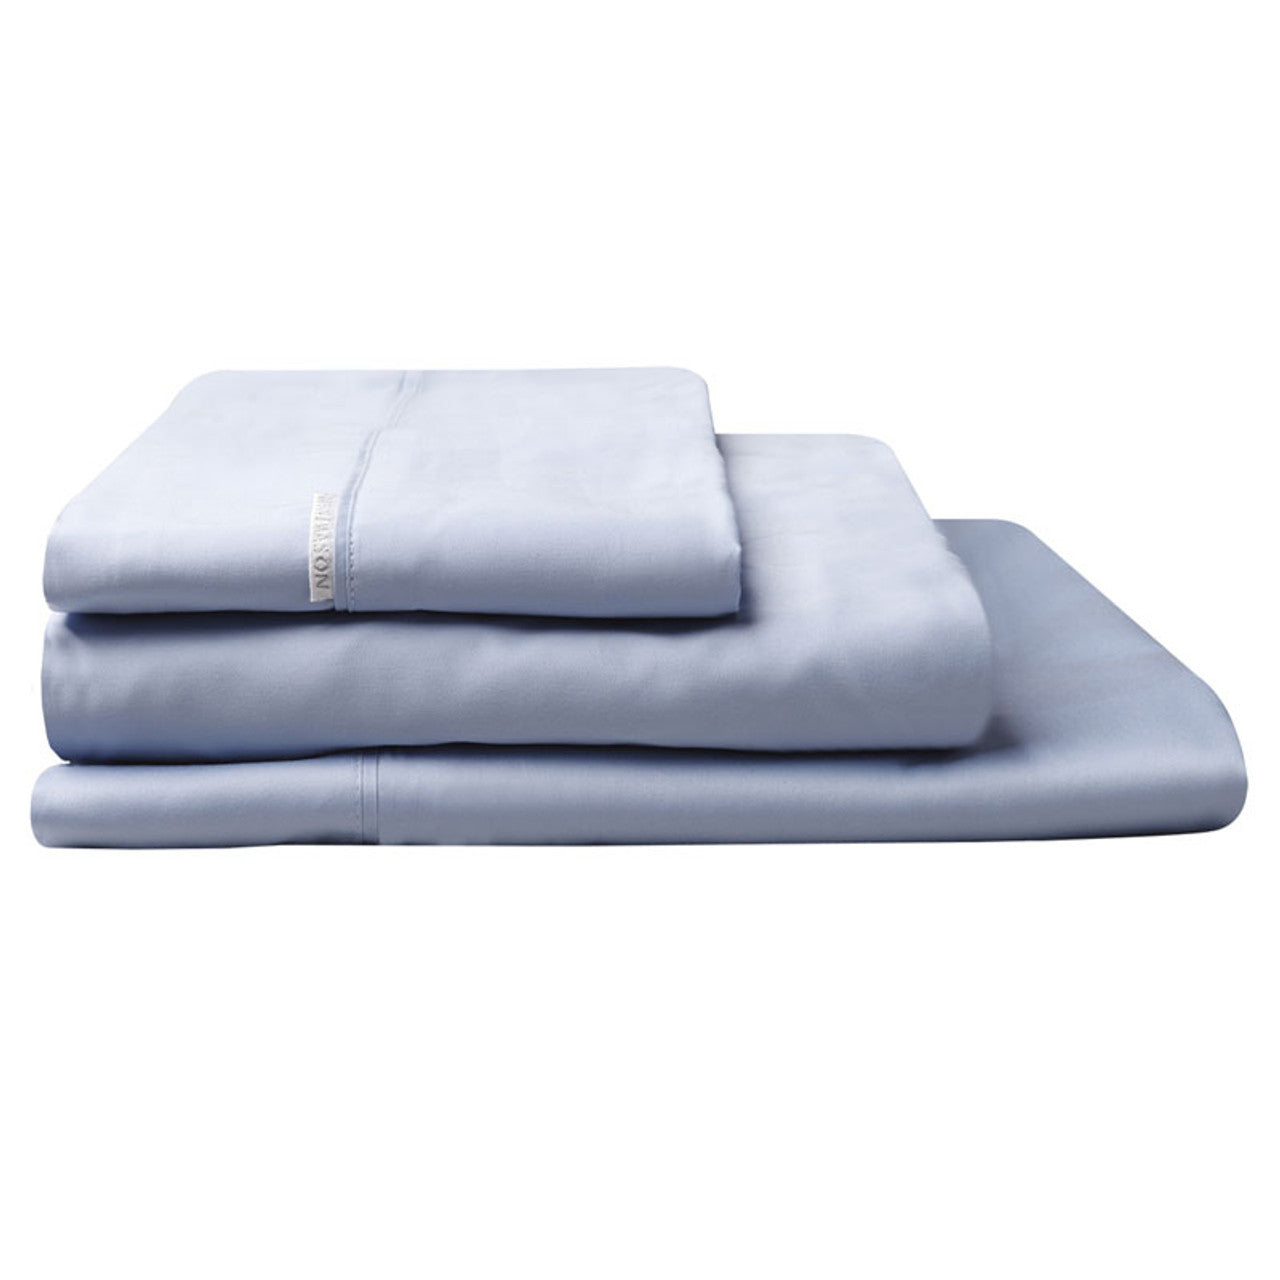 Indulge in the pinnacle of luxury with the Wedgwood Bed Sheet Sets by Logan and Mason. Crafted from pure Egyptian Cotton with an impressive 400 thread count, these sheets offer unparalleled softness and a silky smooth feel. 